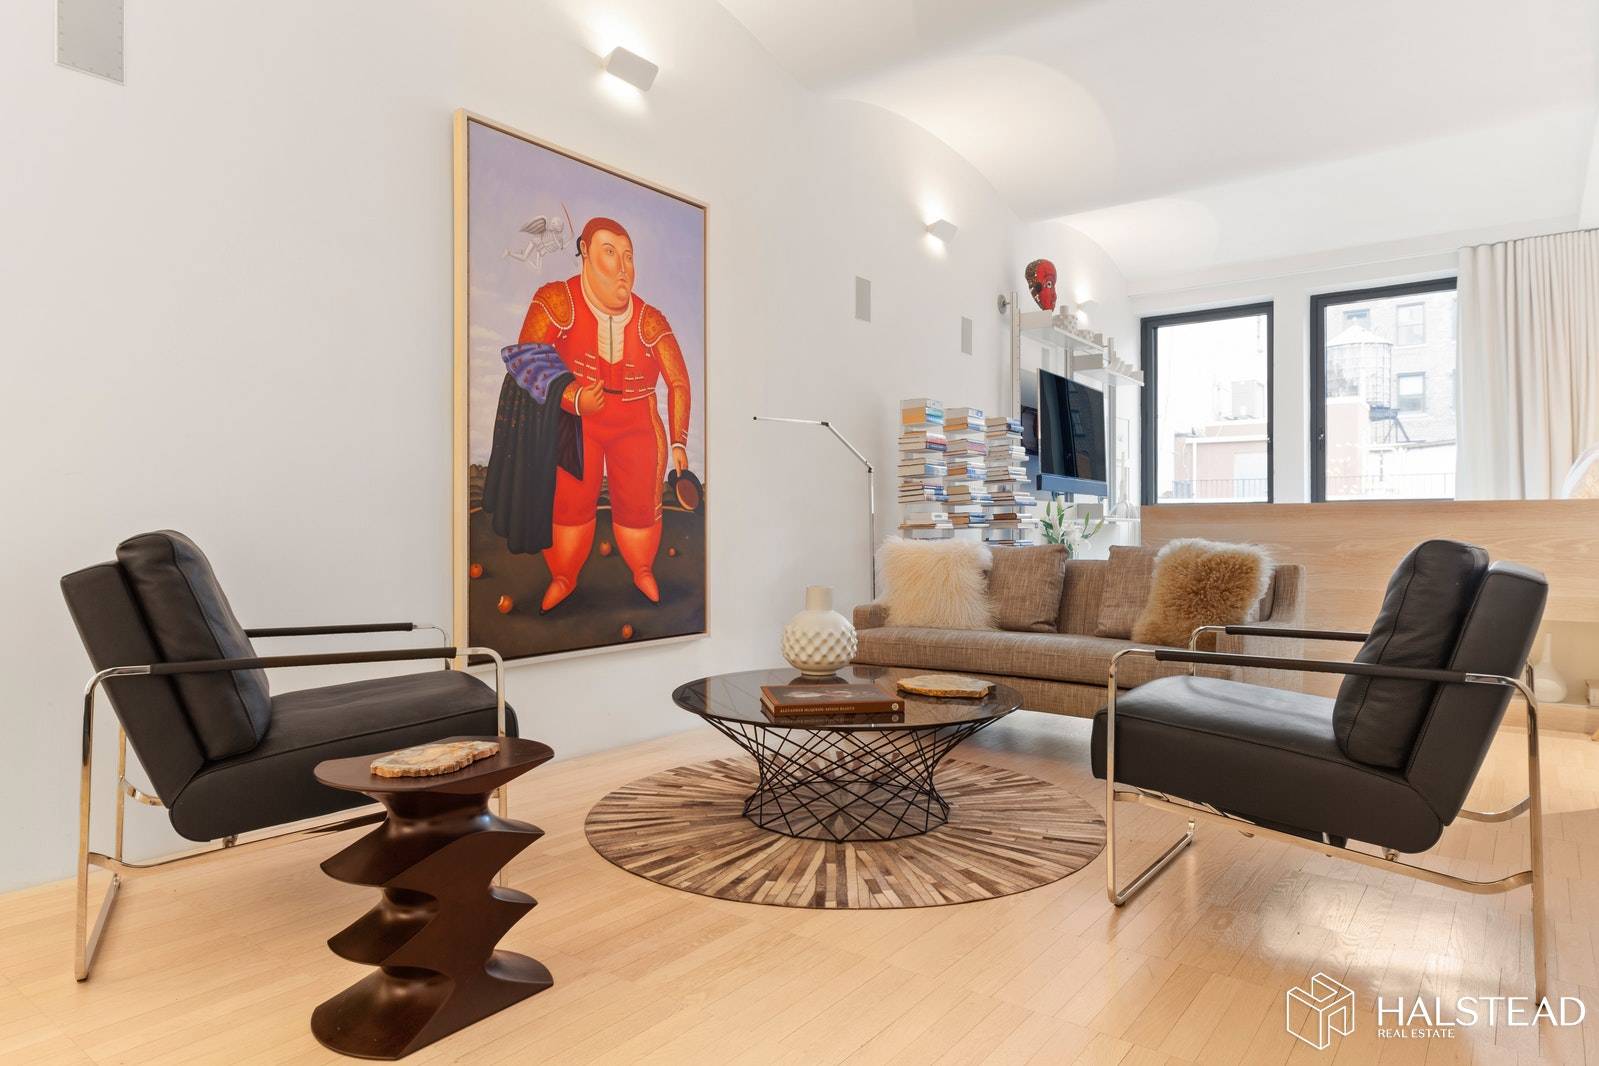 FEATURED IN ARCHITECTURAL DIGEST AND NY MAGAZINE BRAND NEW TO MARKET A BRIGHT AND BEAUTIFUL STUDIO LOFT !